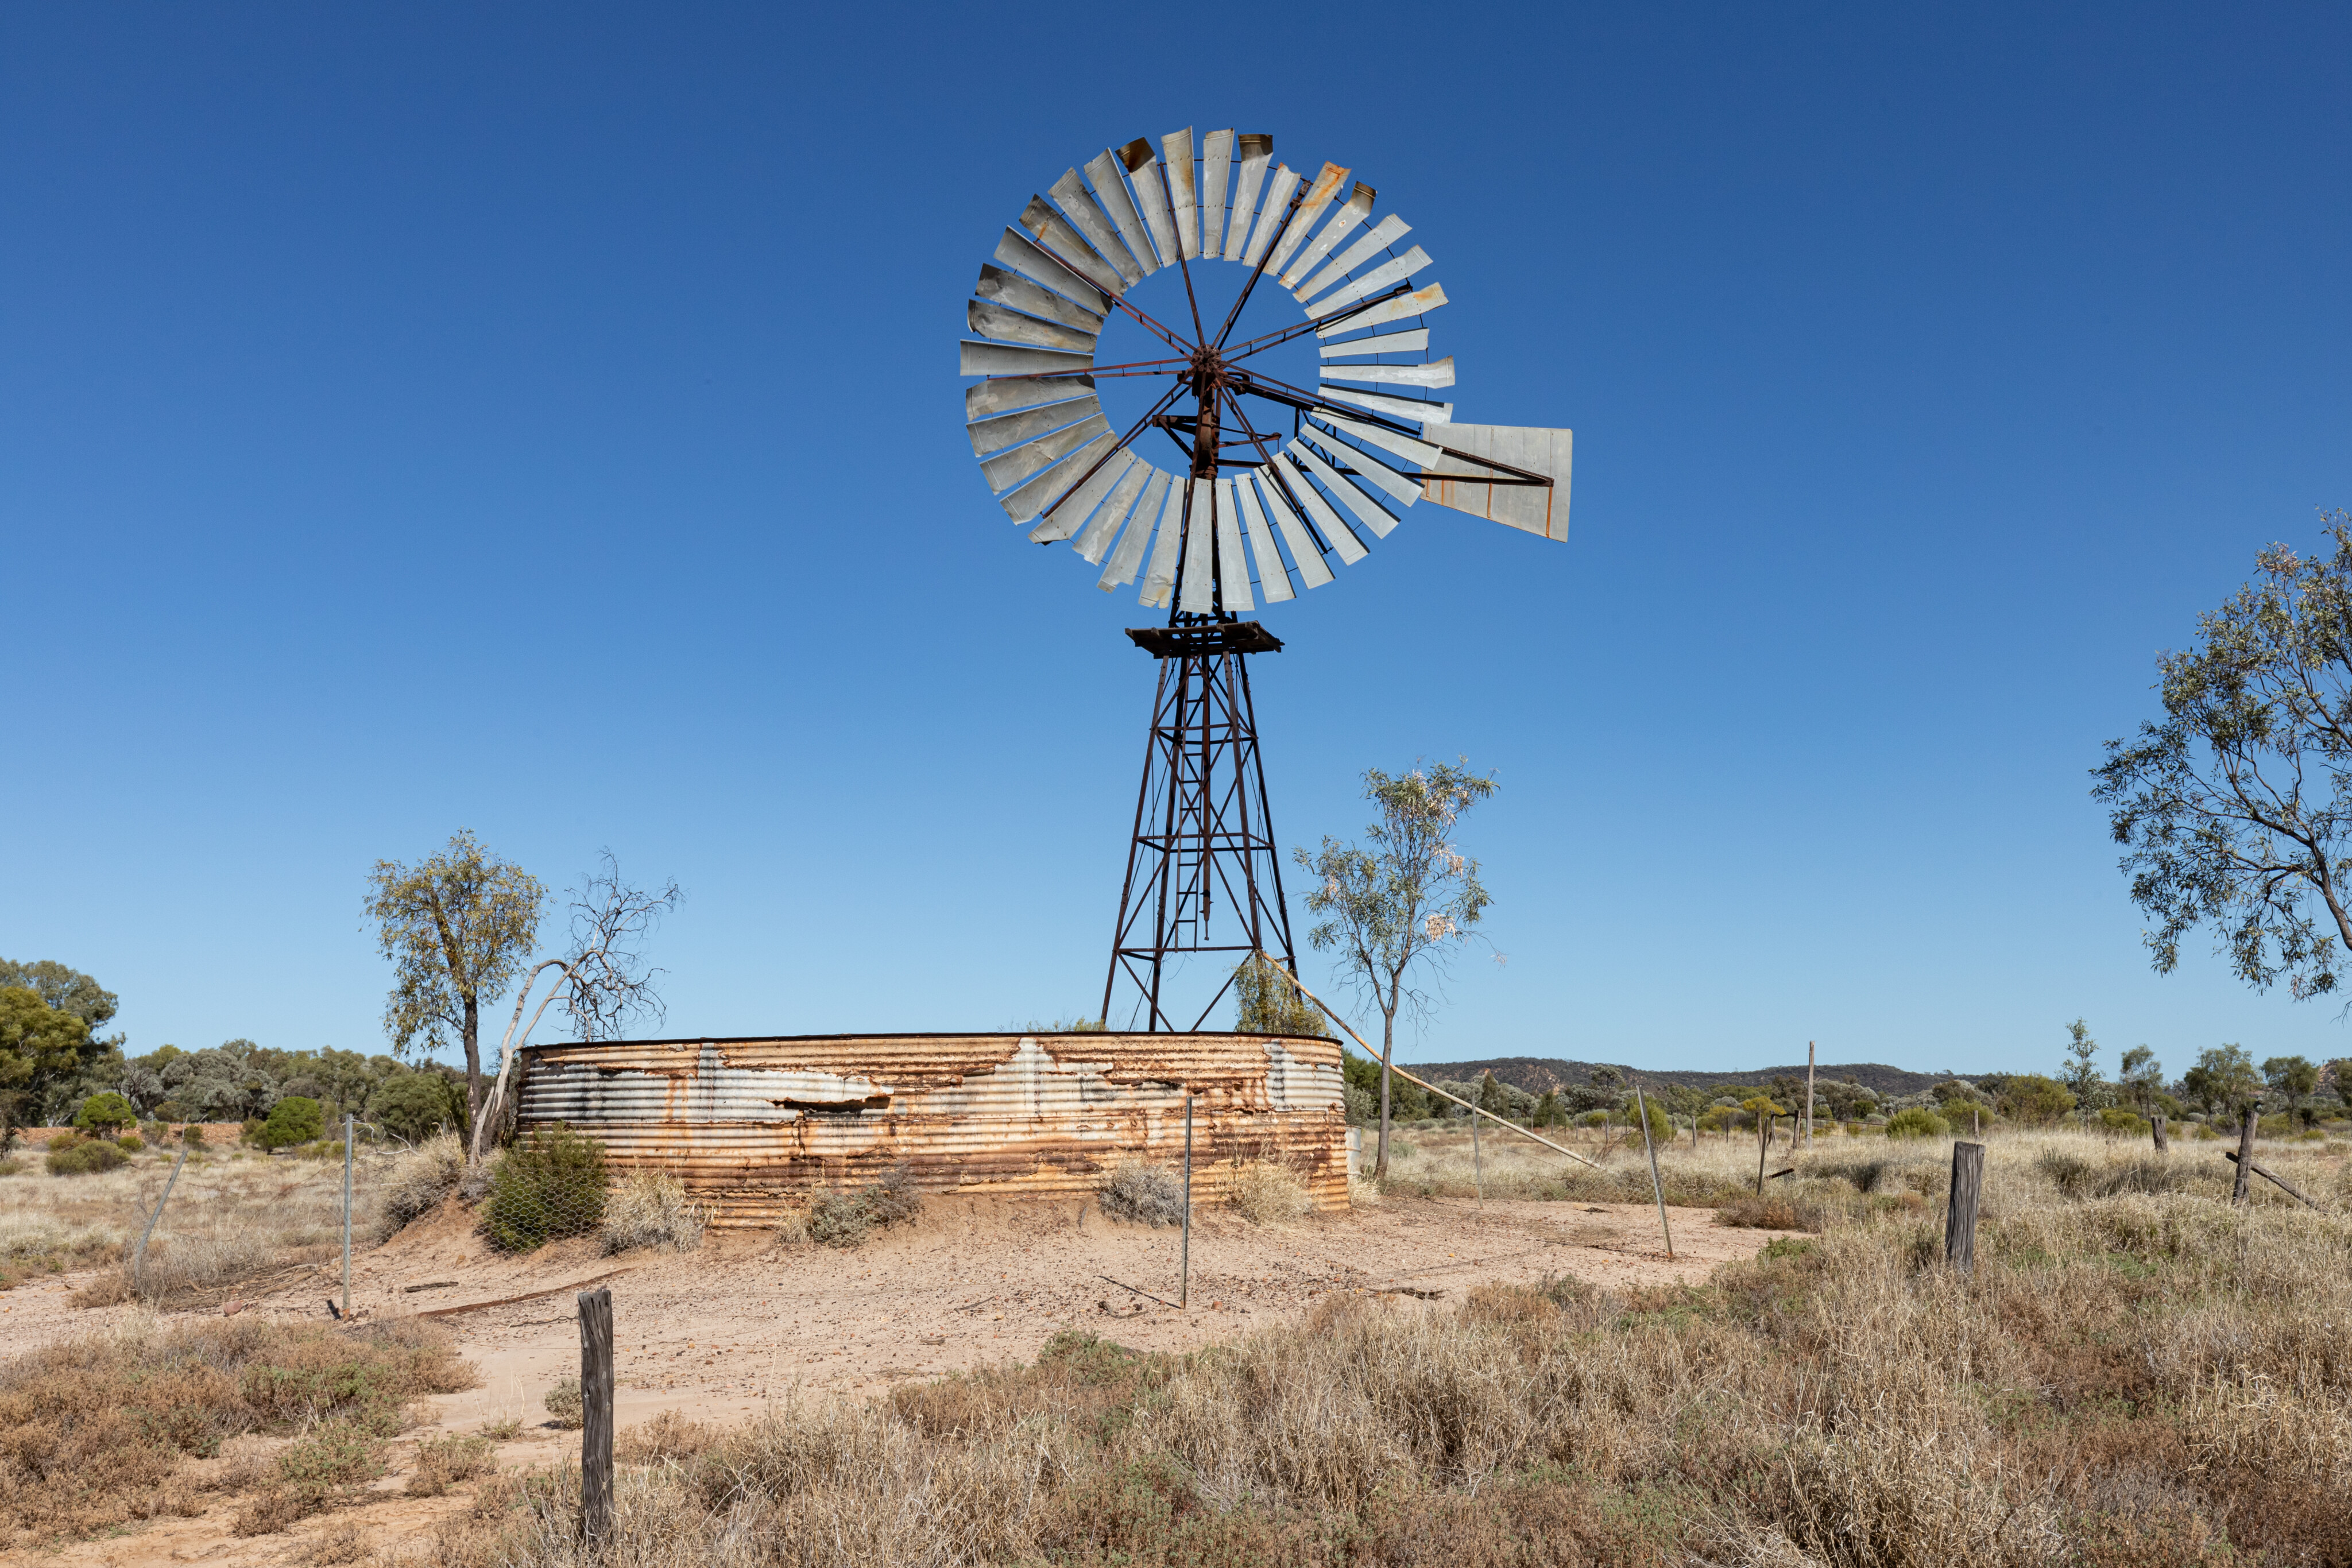 90e42f61/explore queensland idalia np chucksters bore was no longer pumping water but it could do with some oil jpg